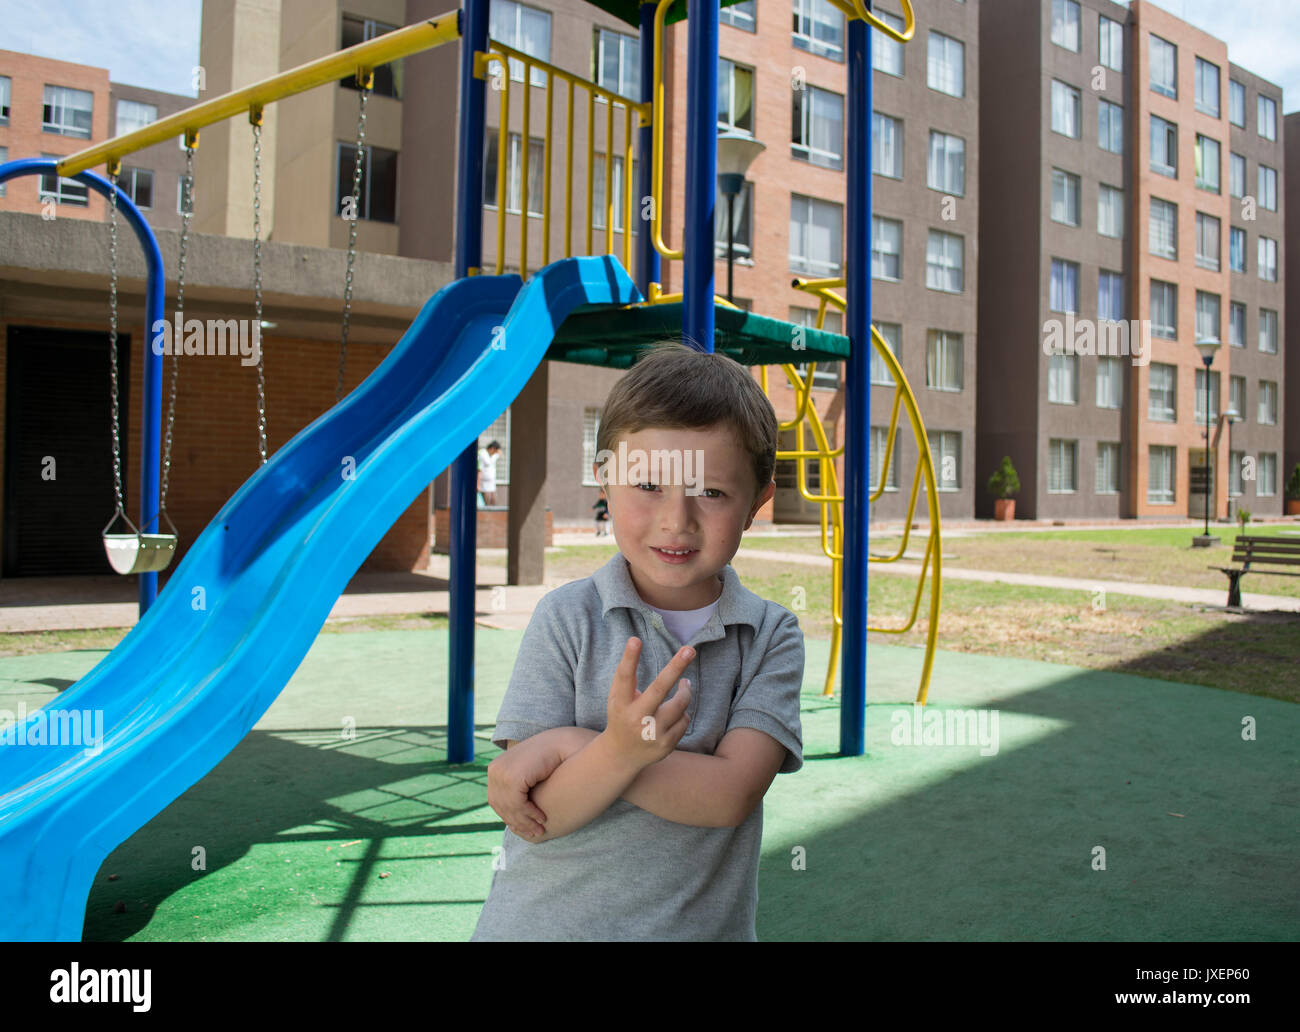 Small child on slide in an outdoors playground. Stock Photo